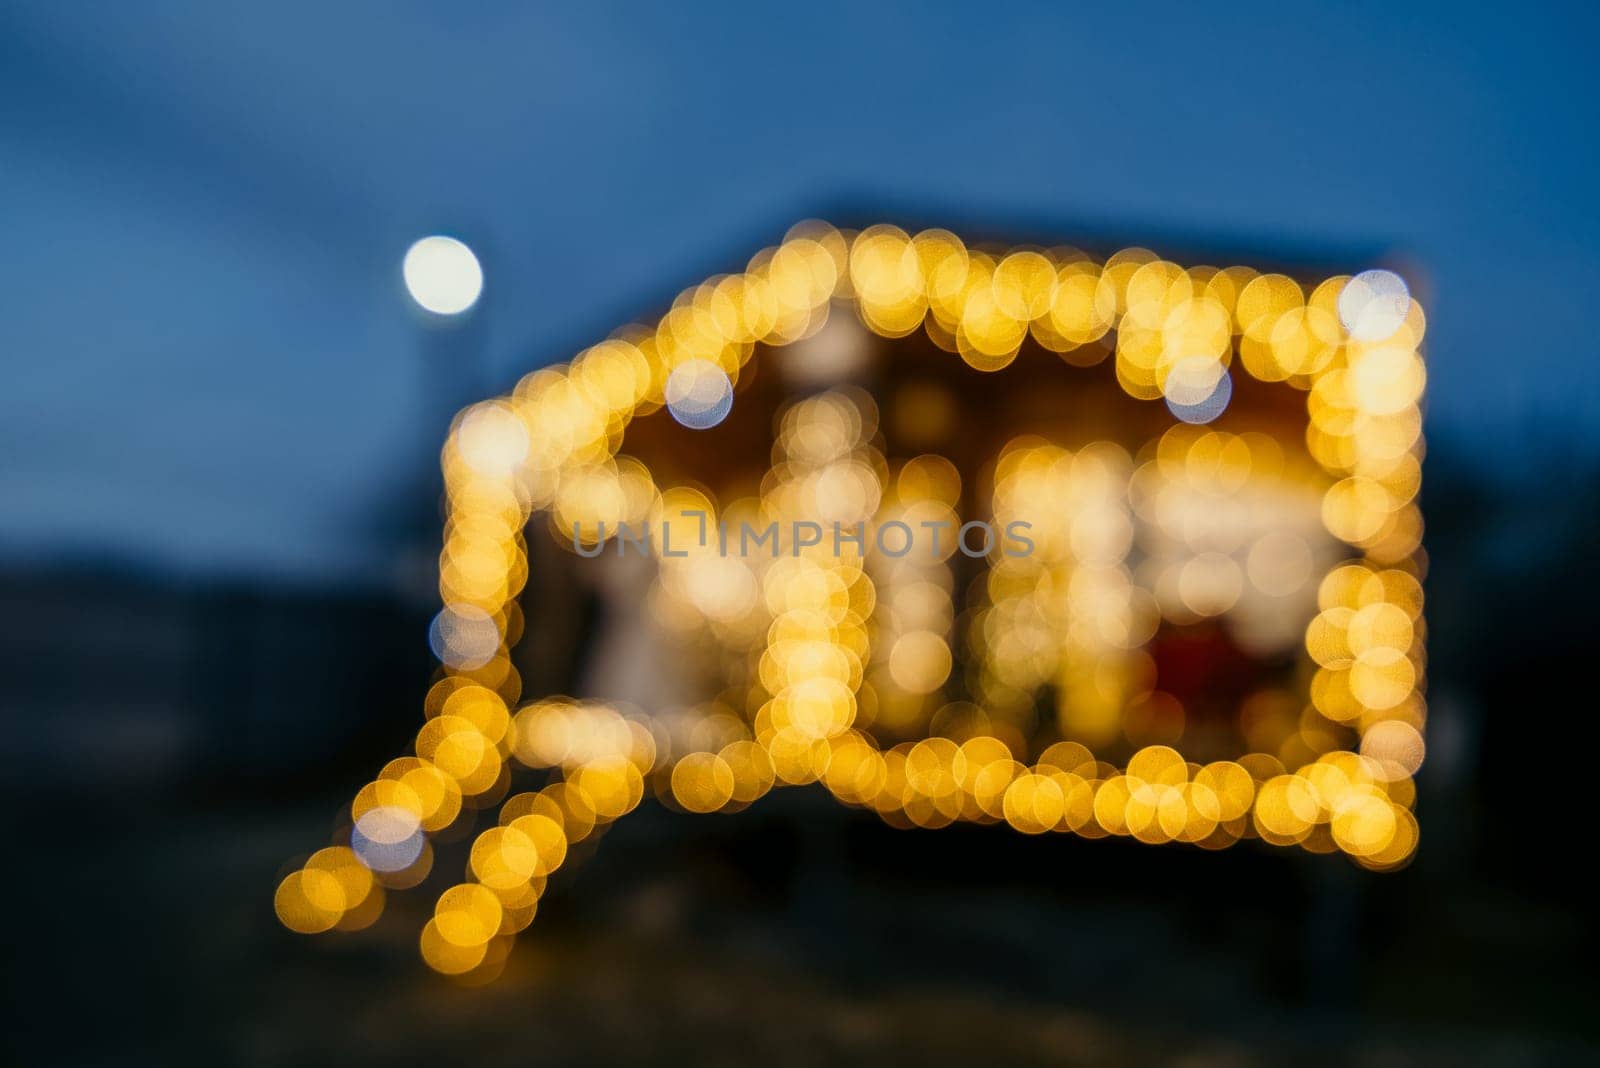 Abstract defocused bright Christmas lights on wooden house, creating decorative illumination in evening scene by panophotograph